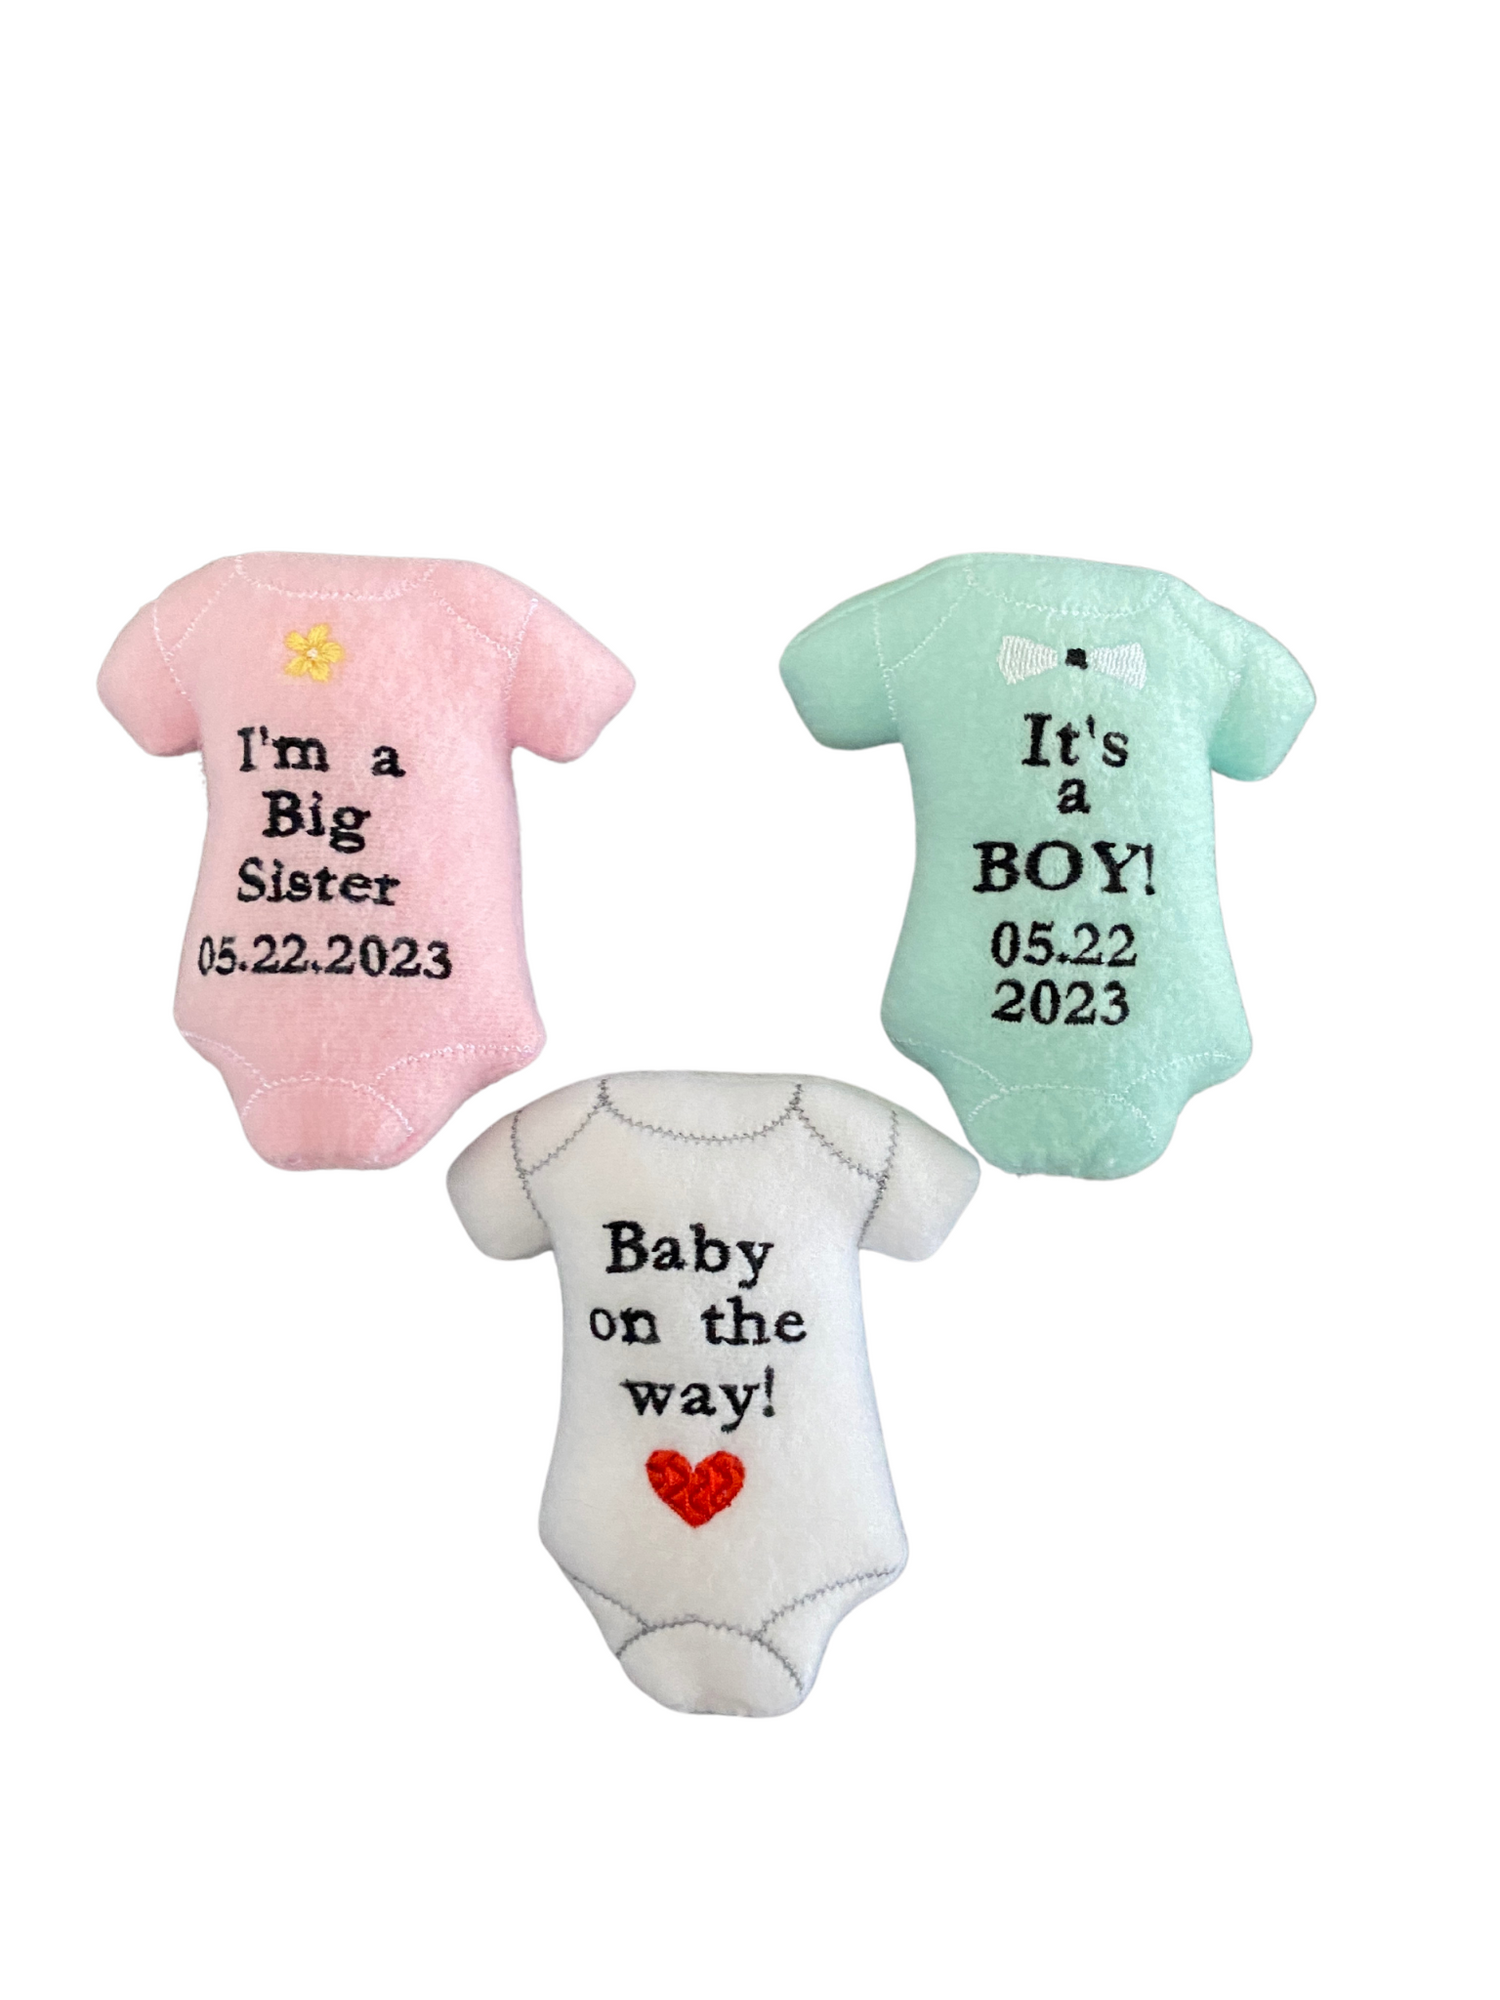 Baby Announcement and Engagement Dog Toys